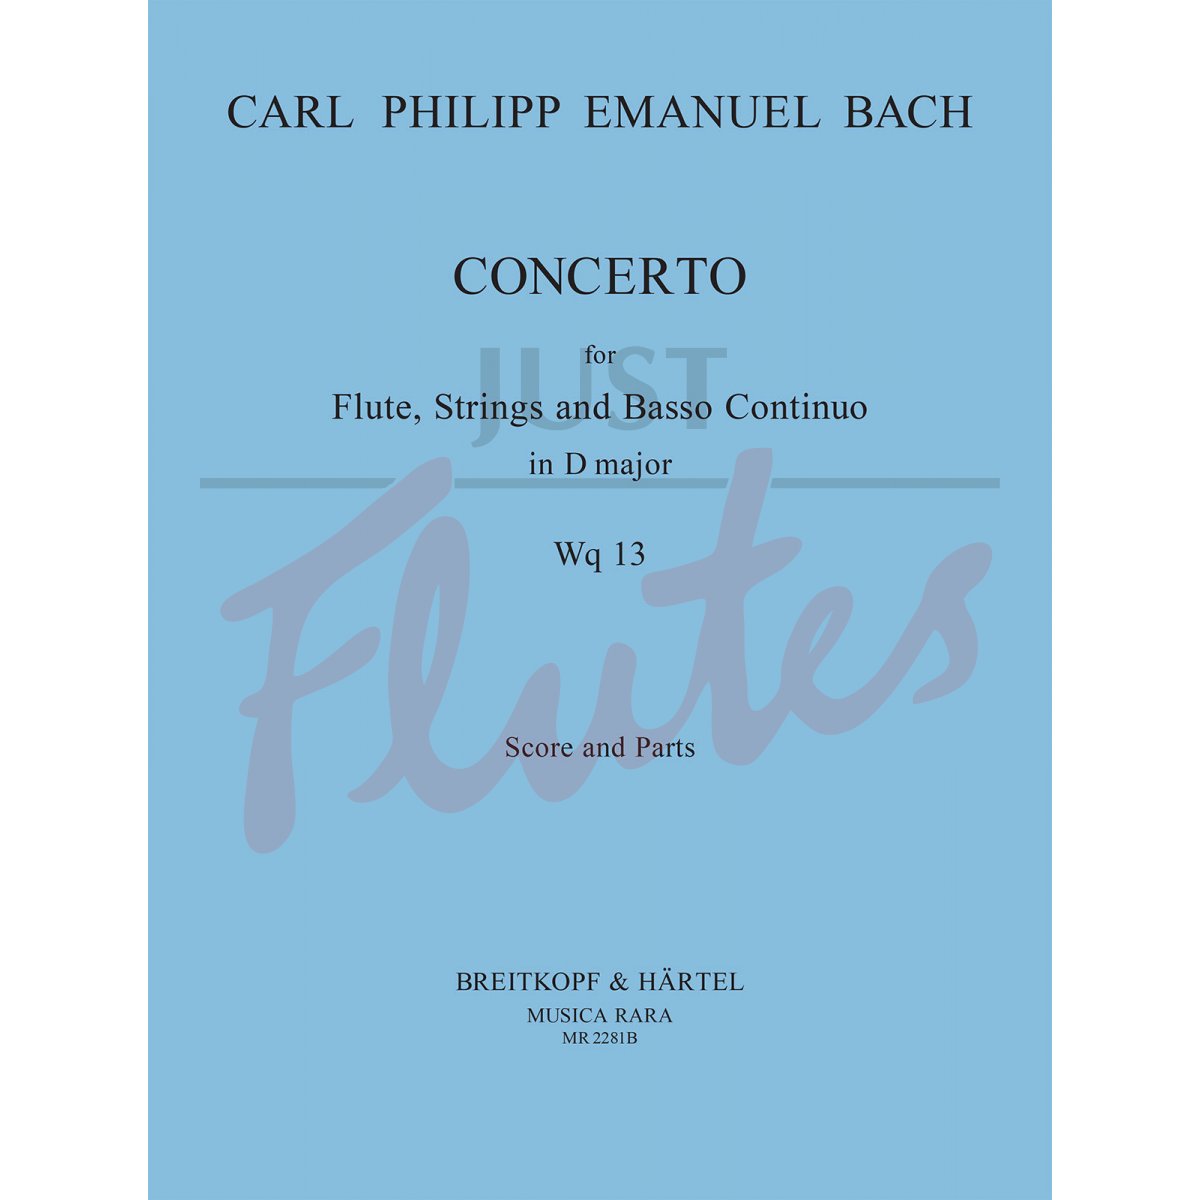 Concerto in D major for Flute, Strings and Basso Continuo